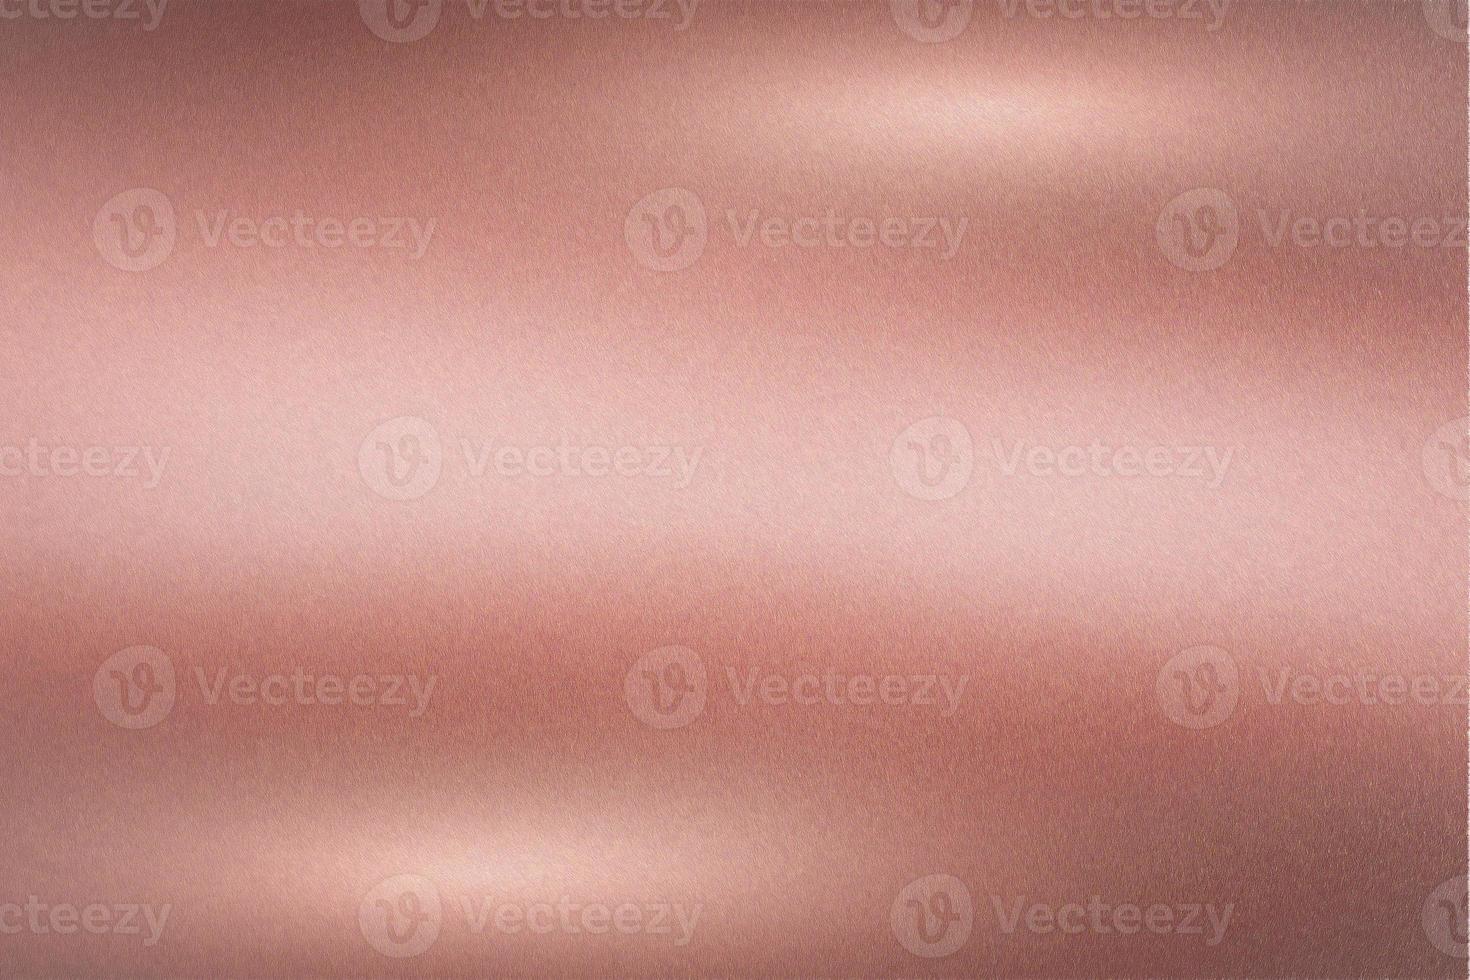 Brushed rose gold metallic wall with scratched surface, abstract texture background photo